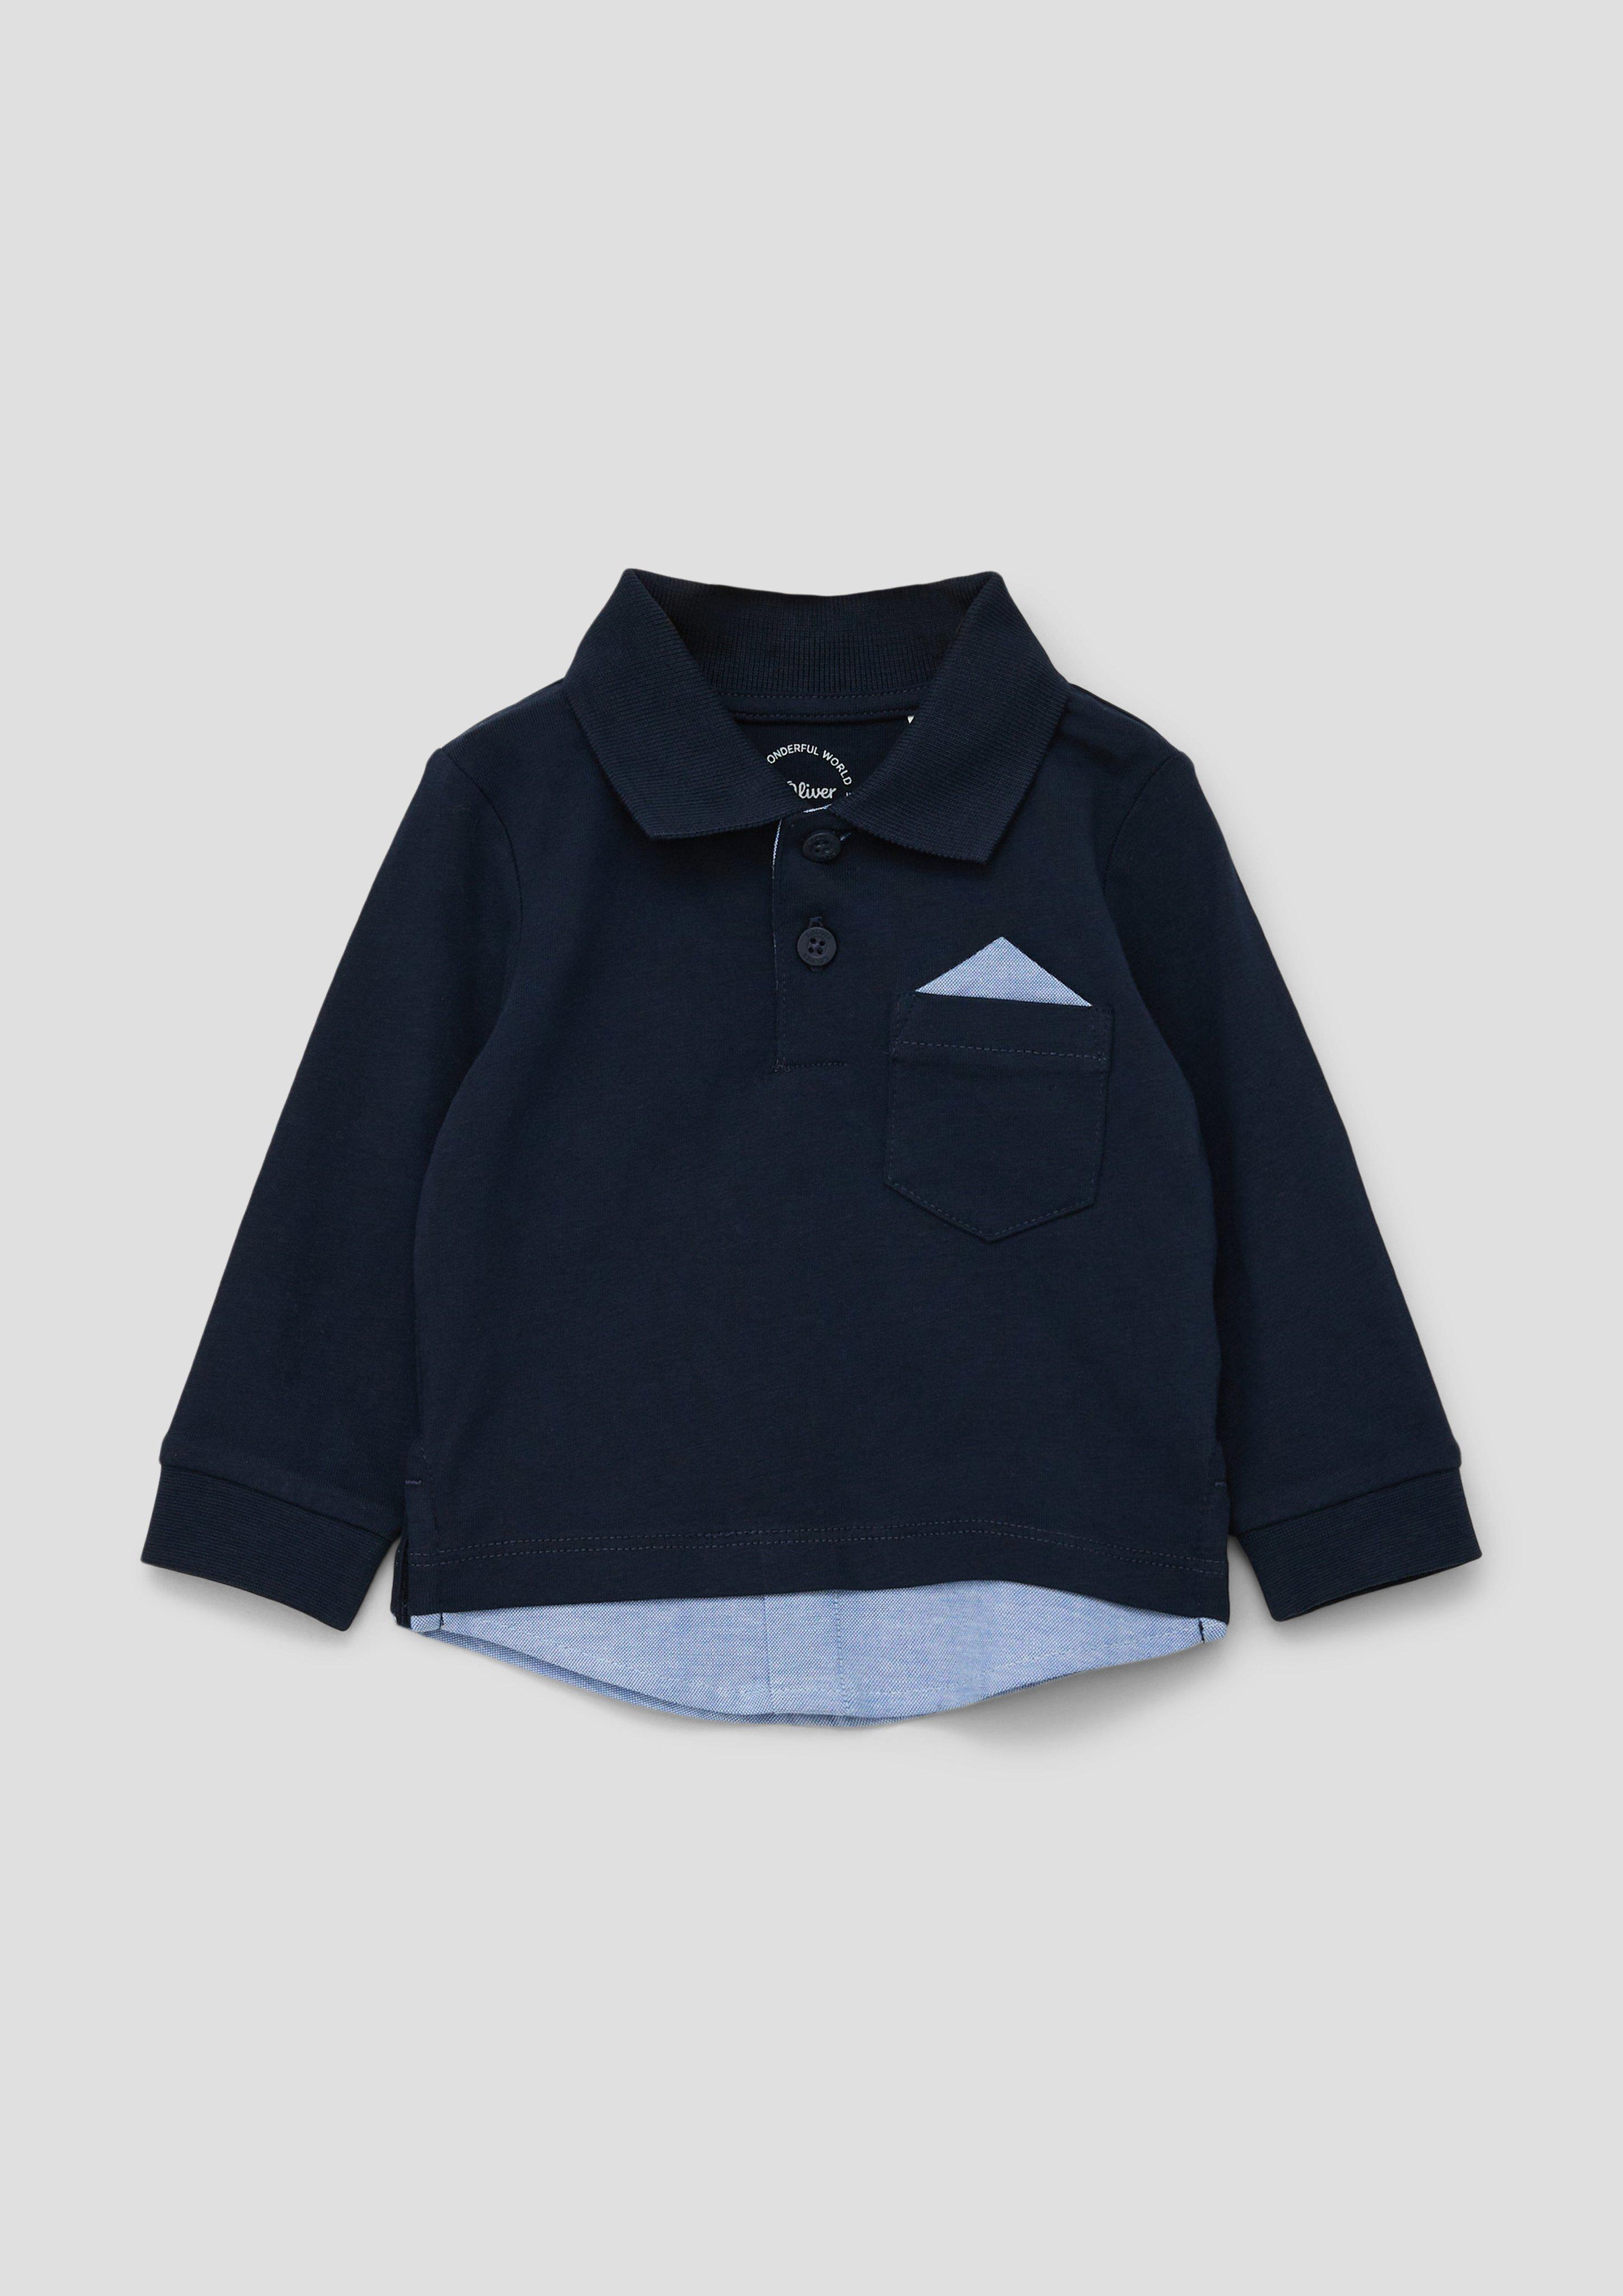 layered Polo look in shirt - navy a